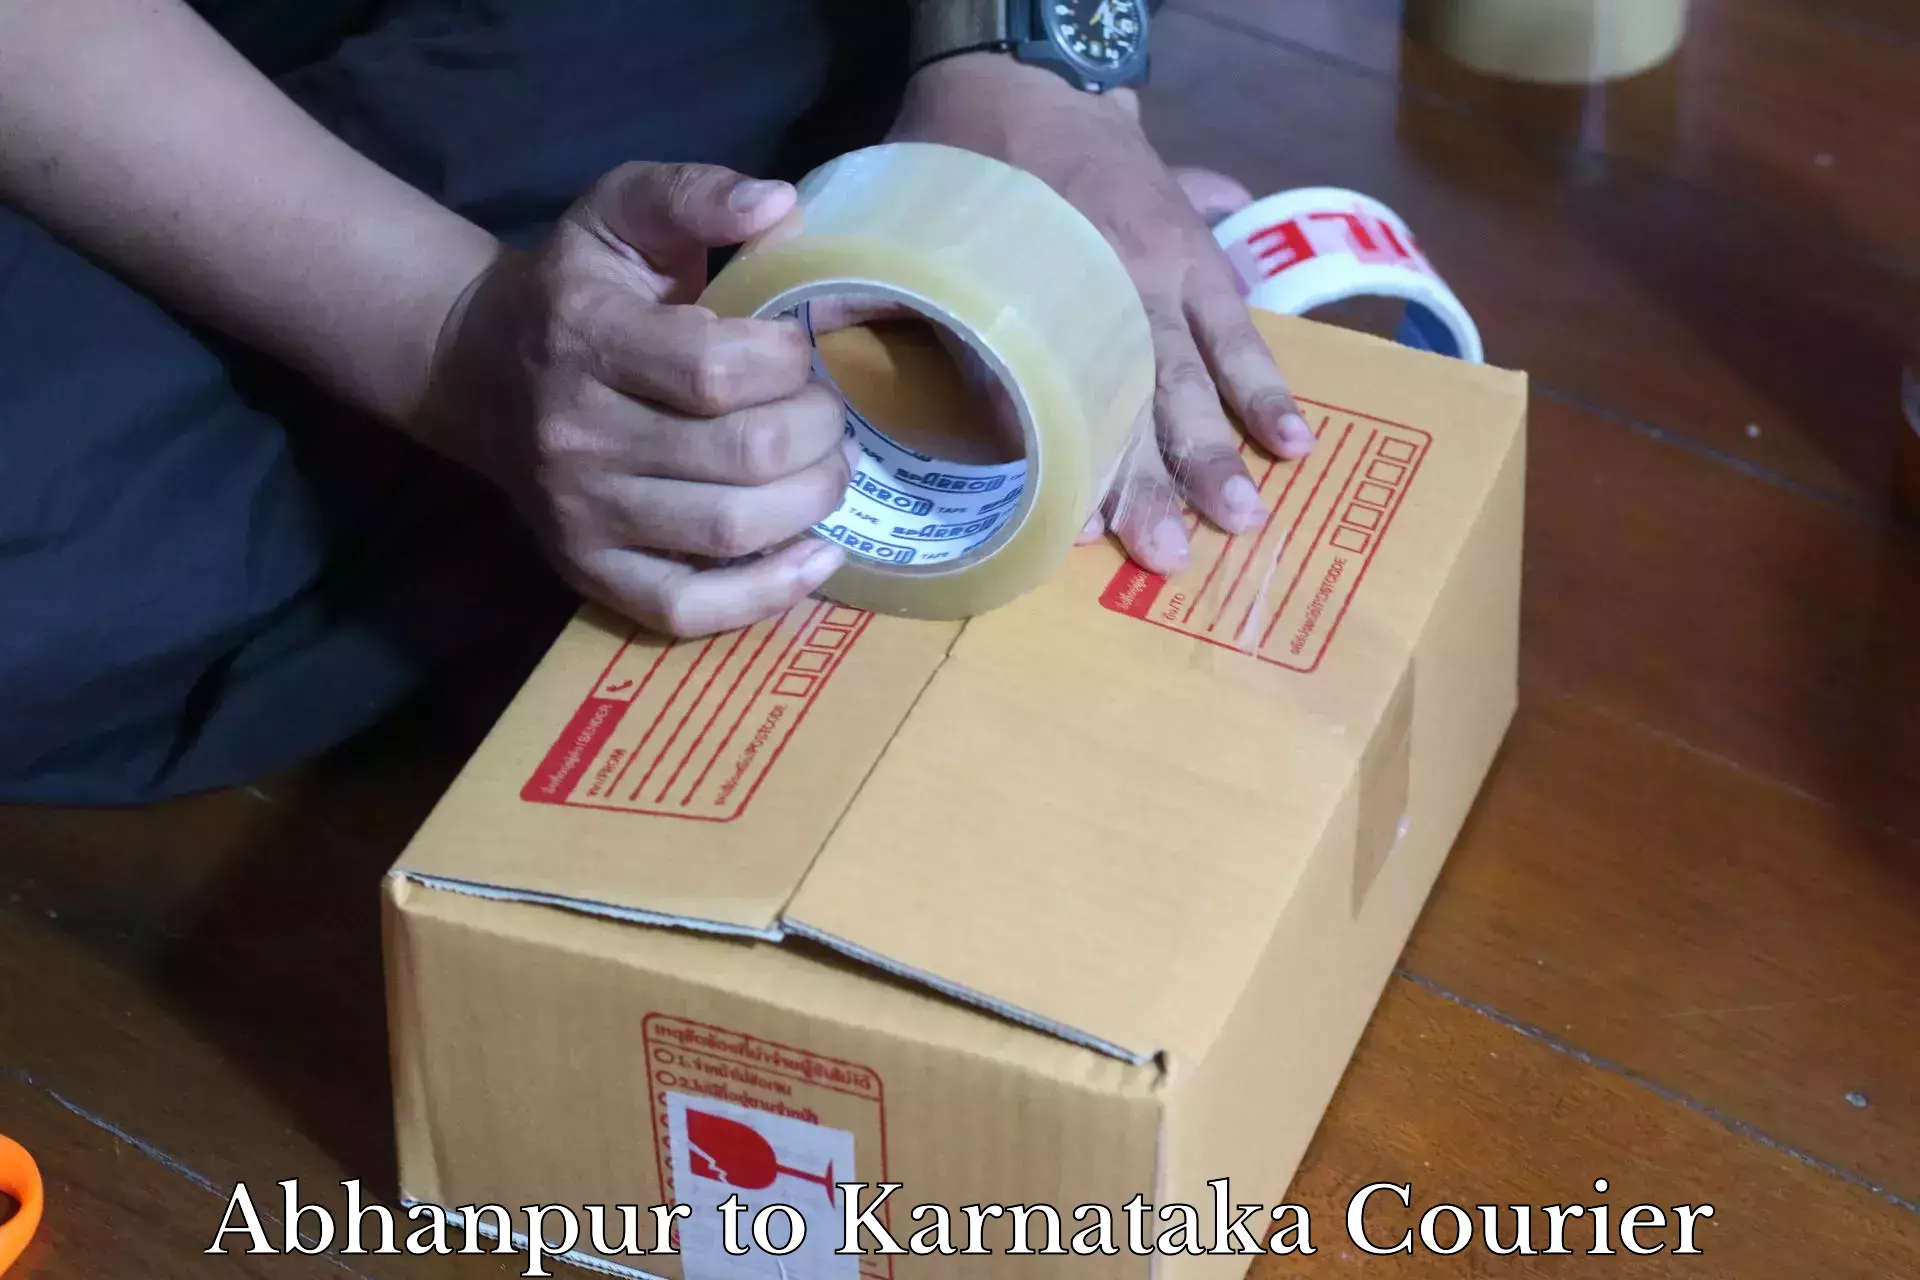 User-friendly delivery service Abhanpur to Karnataka